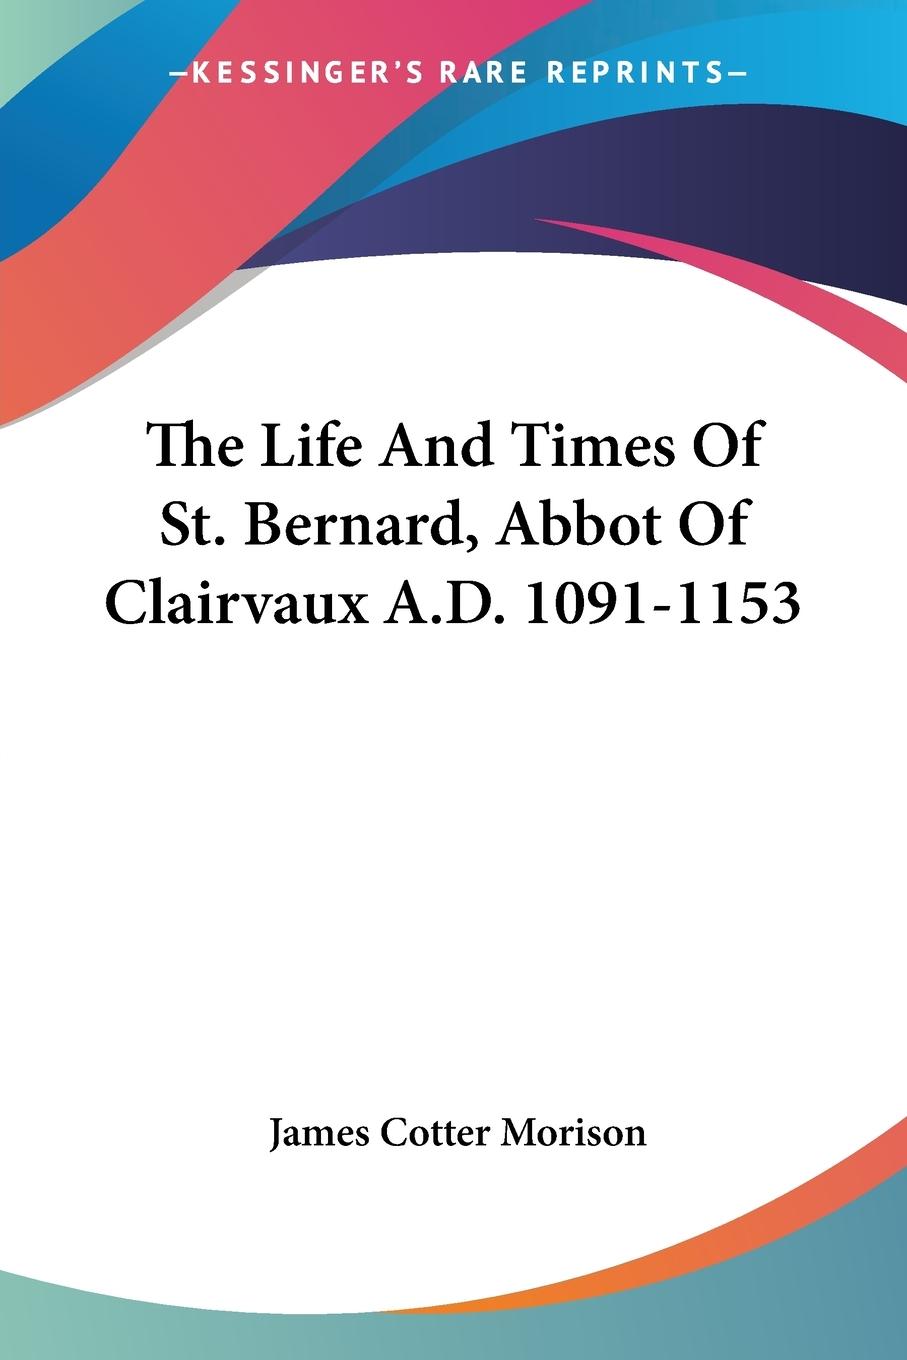 The Life And Times Of St. Bernard, Abbot Of Clairvaux A.D. 1091-1153 - Morison, James Cotter